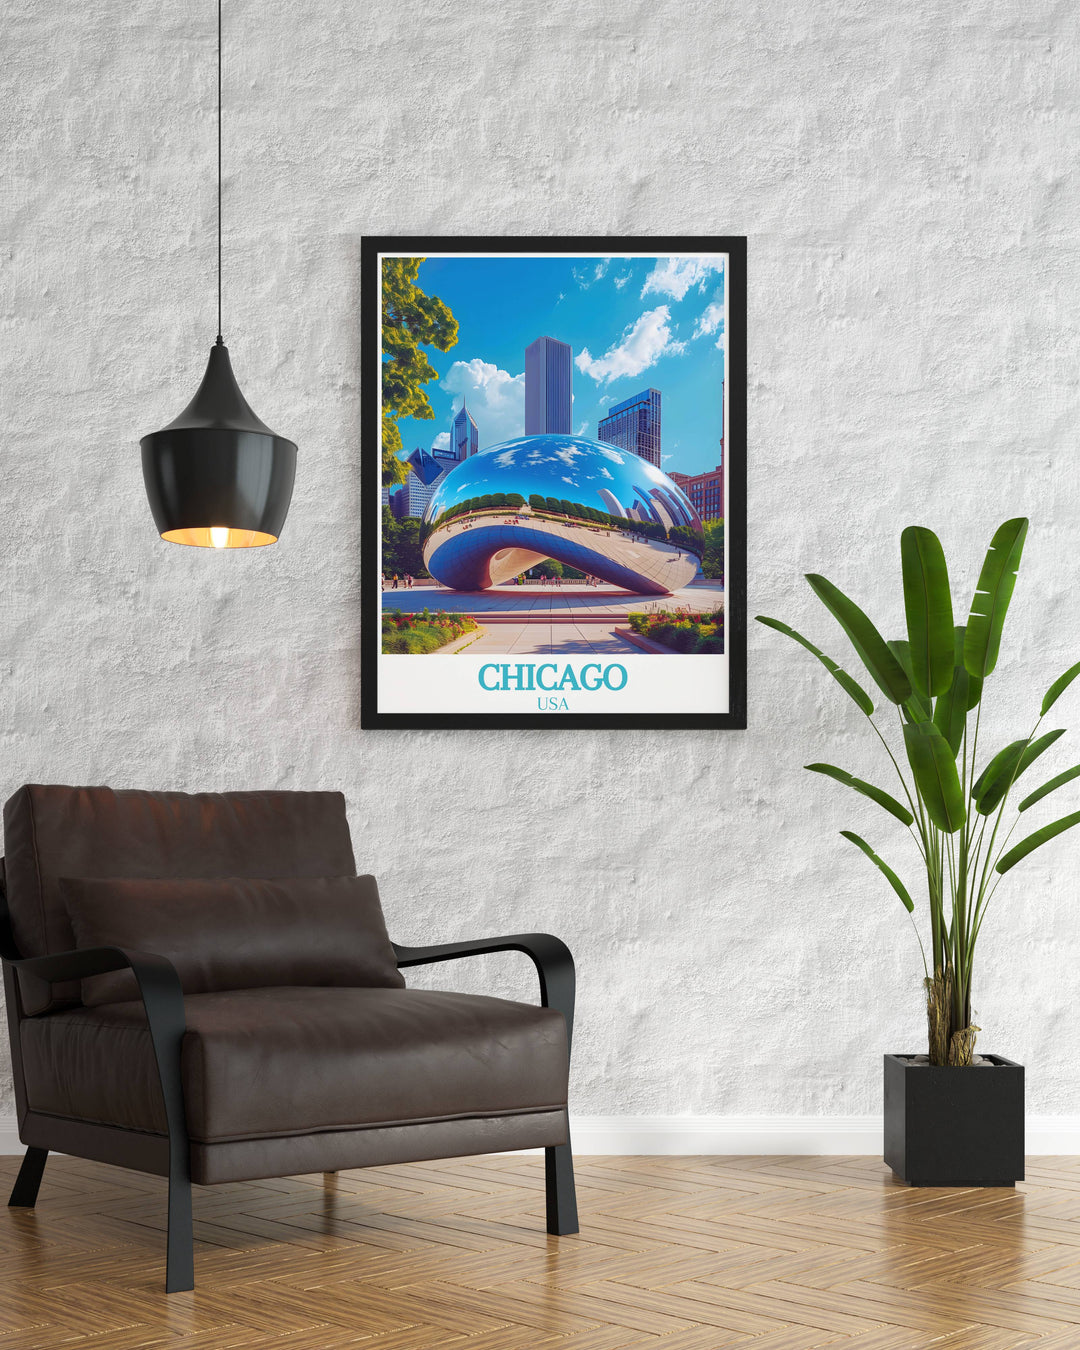 Chicago photograph of The Bean Cloud Gate reflecting the city skyline. Ideal for creating a focal point in your living space this Chicago art print brings the beauty and magic of the Windy City into your home.